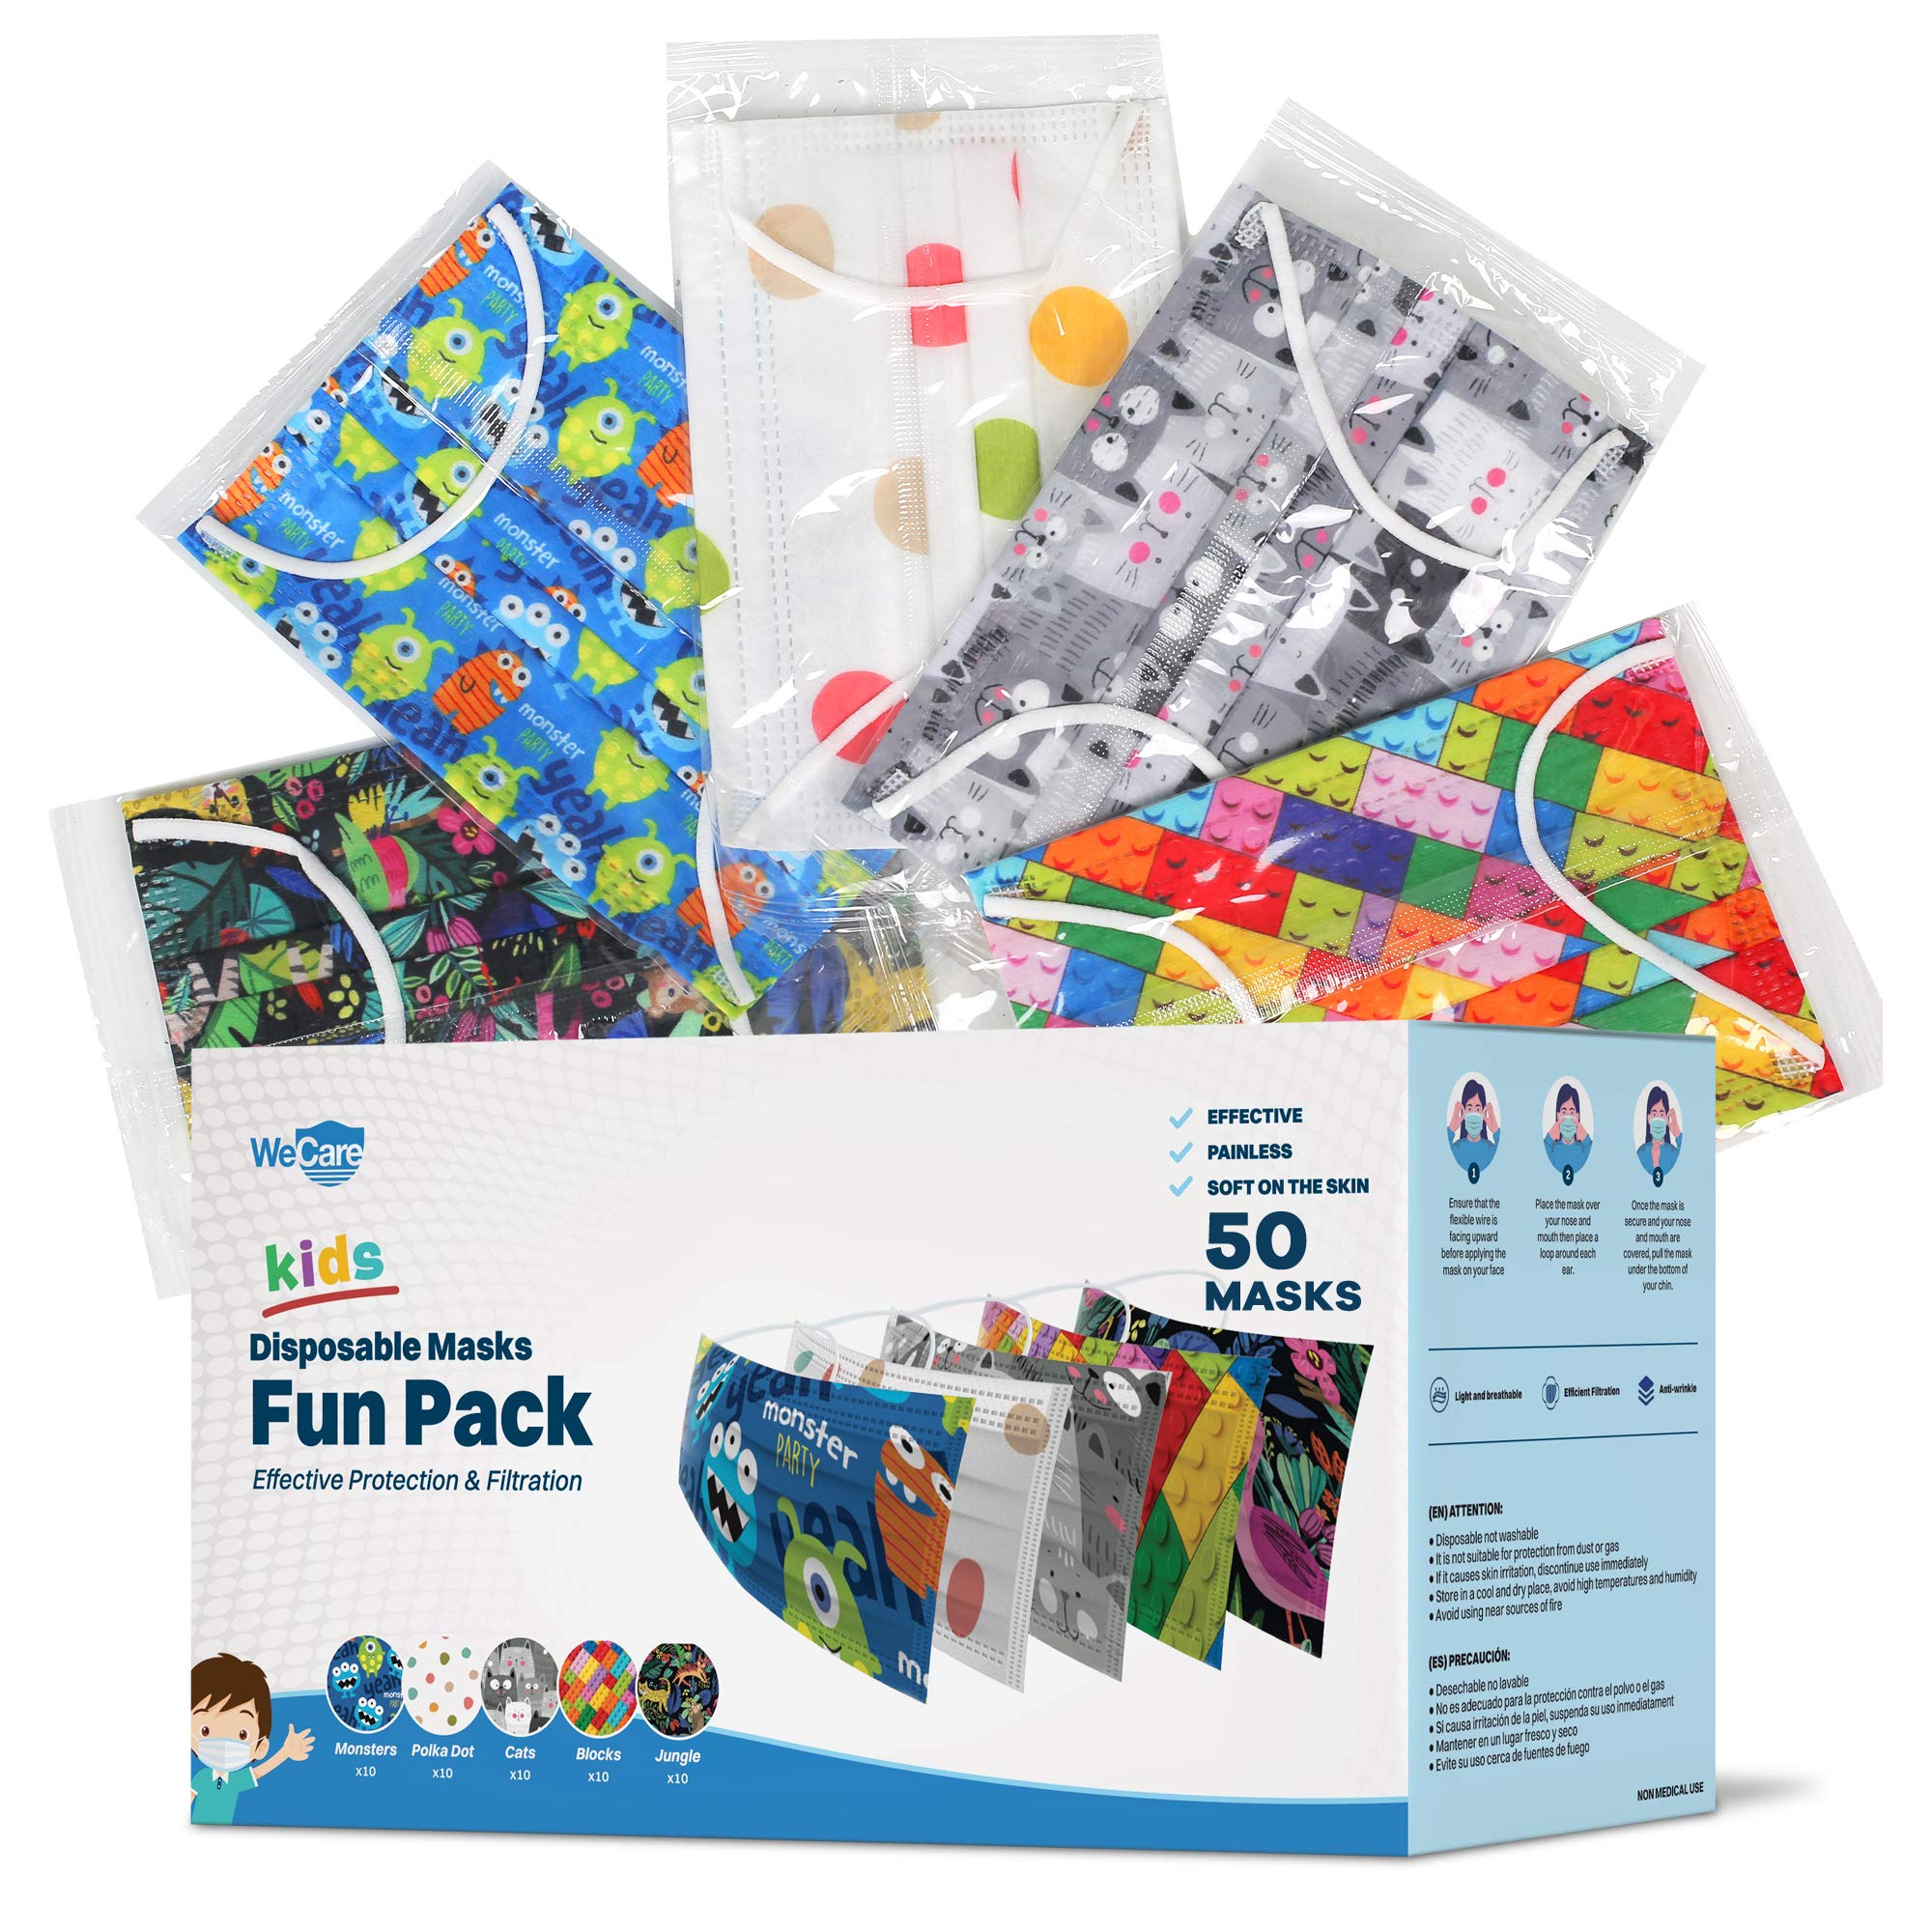 WECARE Disposable Face Masks For Kids, 50 Print Masks, Individually Wrapped for School and Travel (Fun Pack)